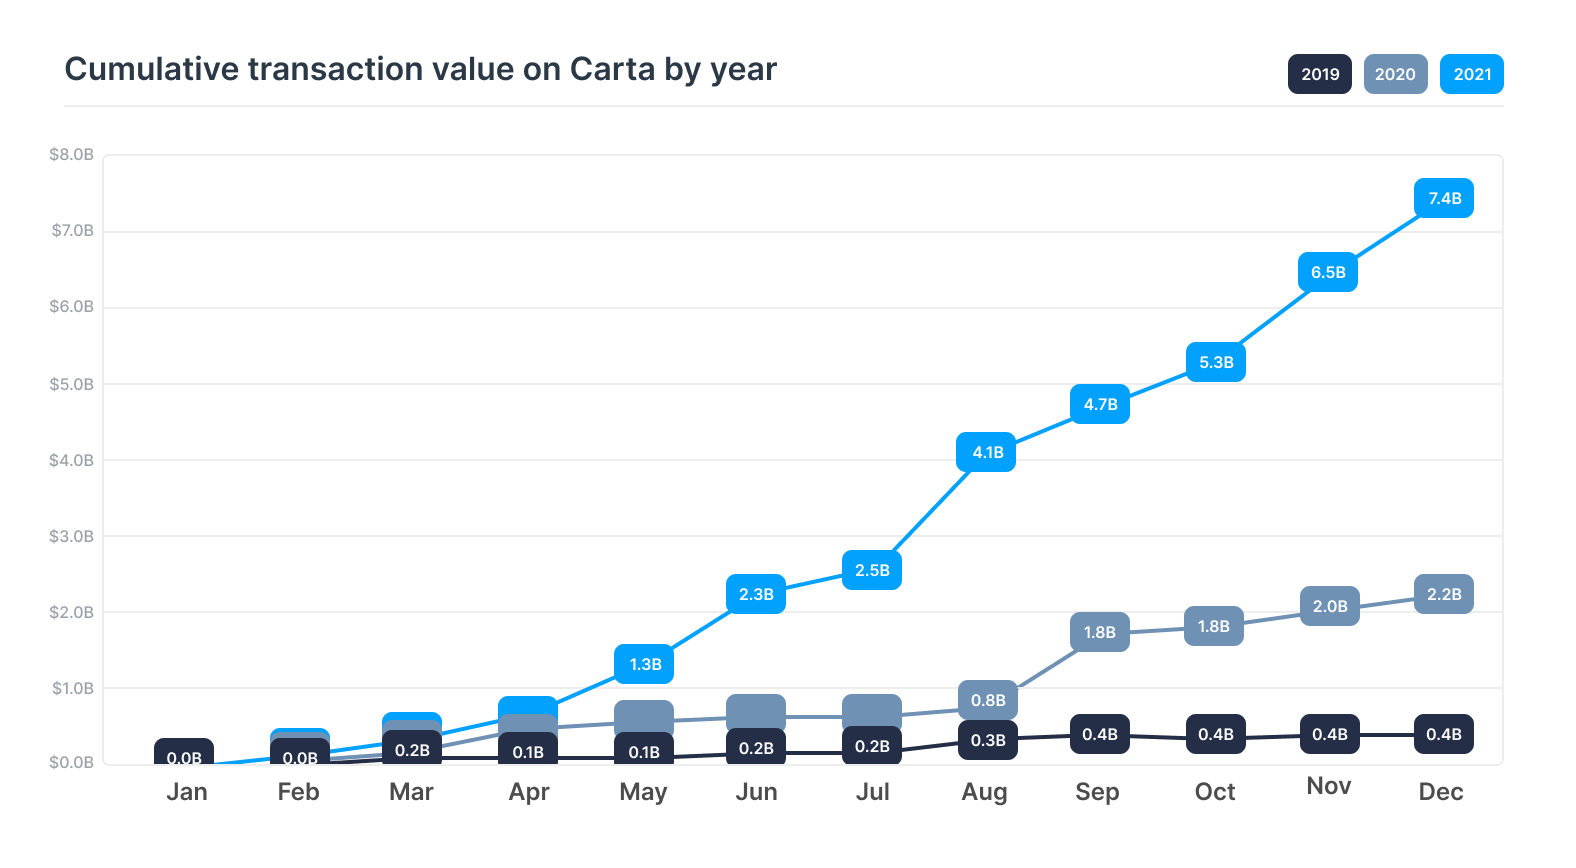 Cumulative transaction value on Carta by year chart